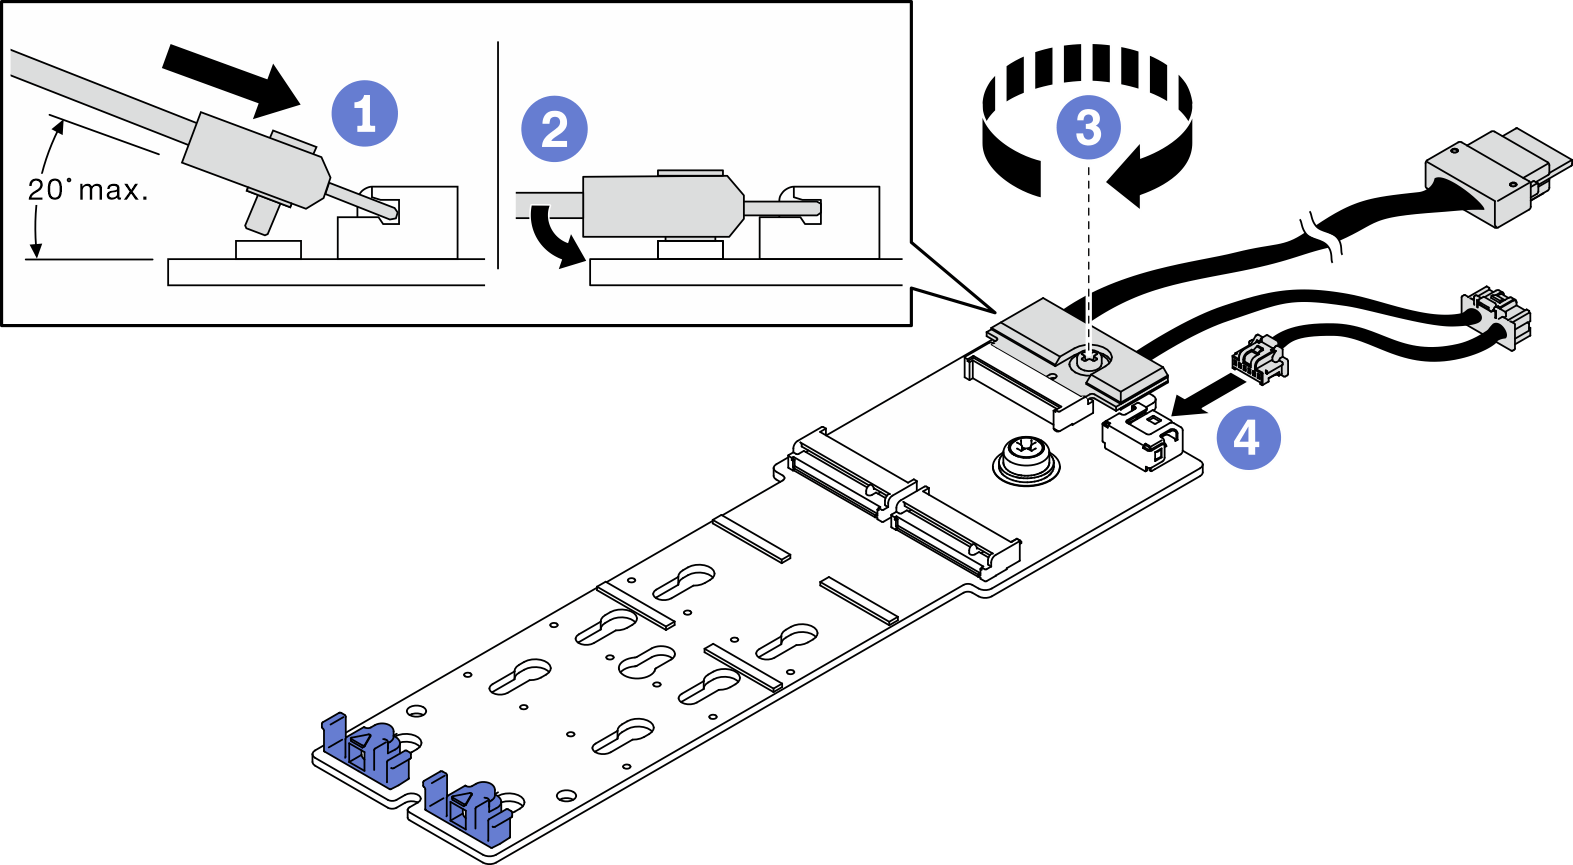 Connecting the M.2 backplane cables to M.2 backplane